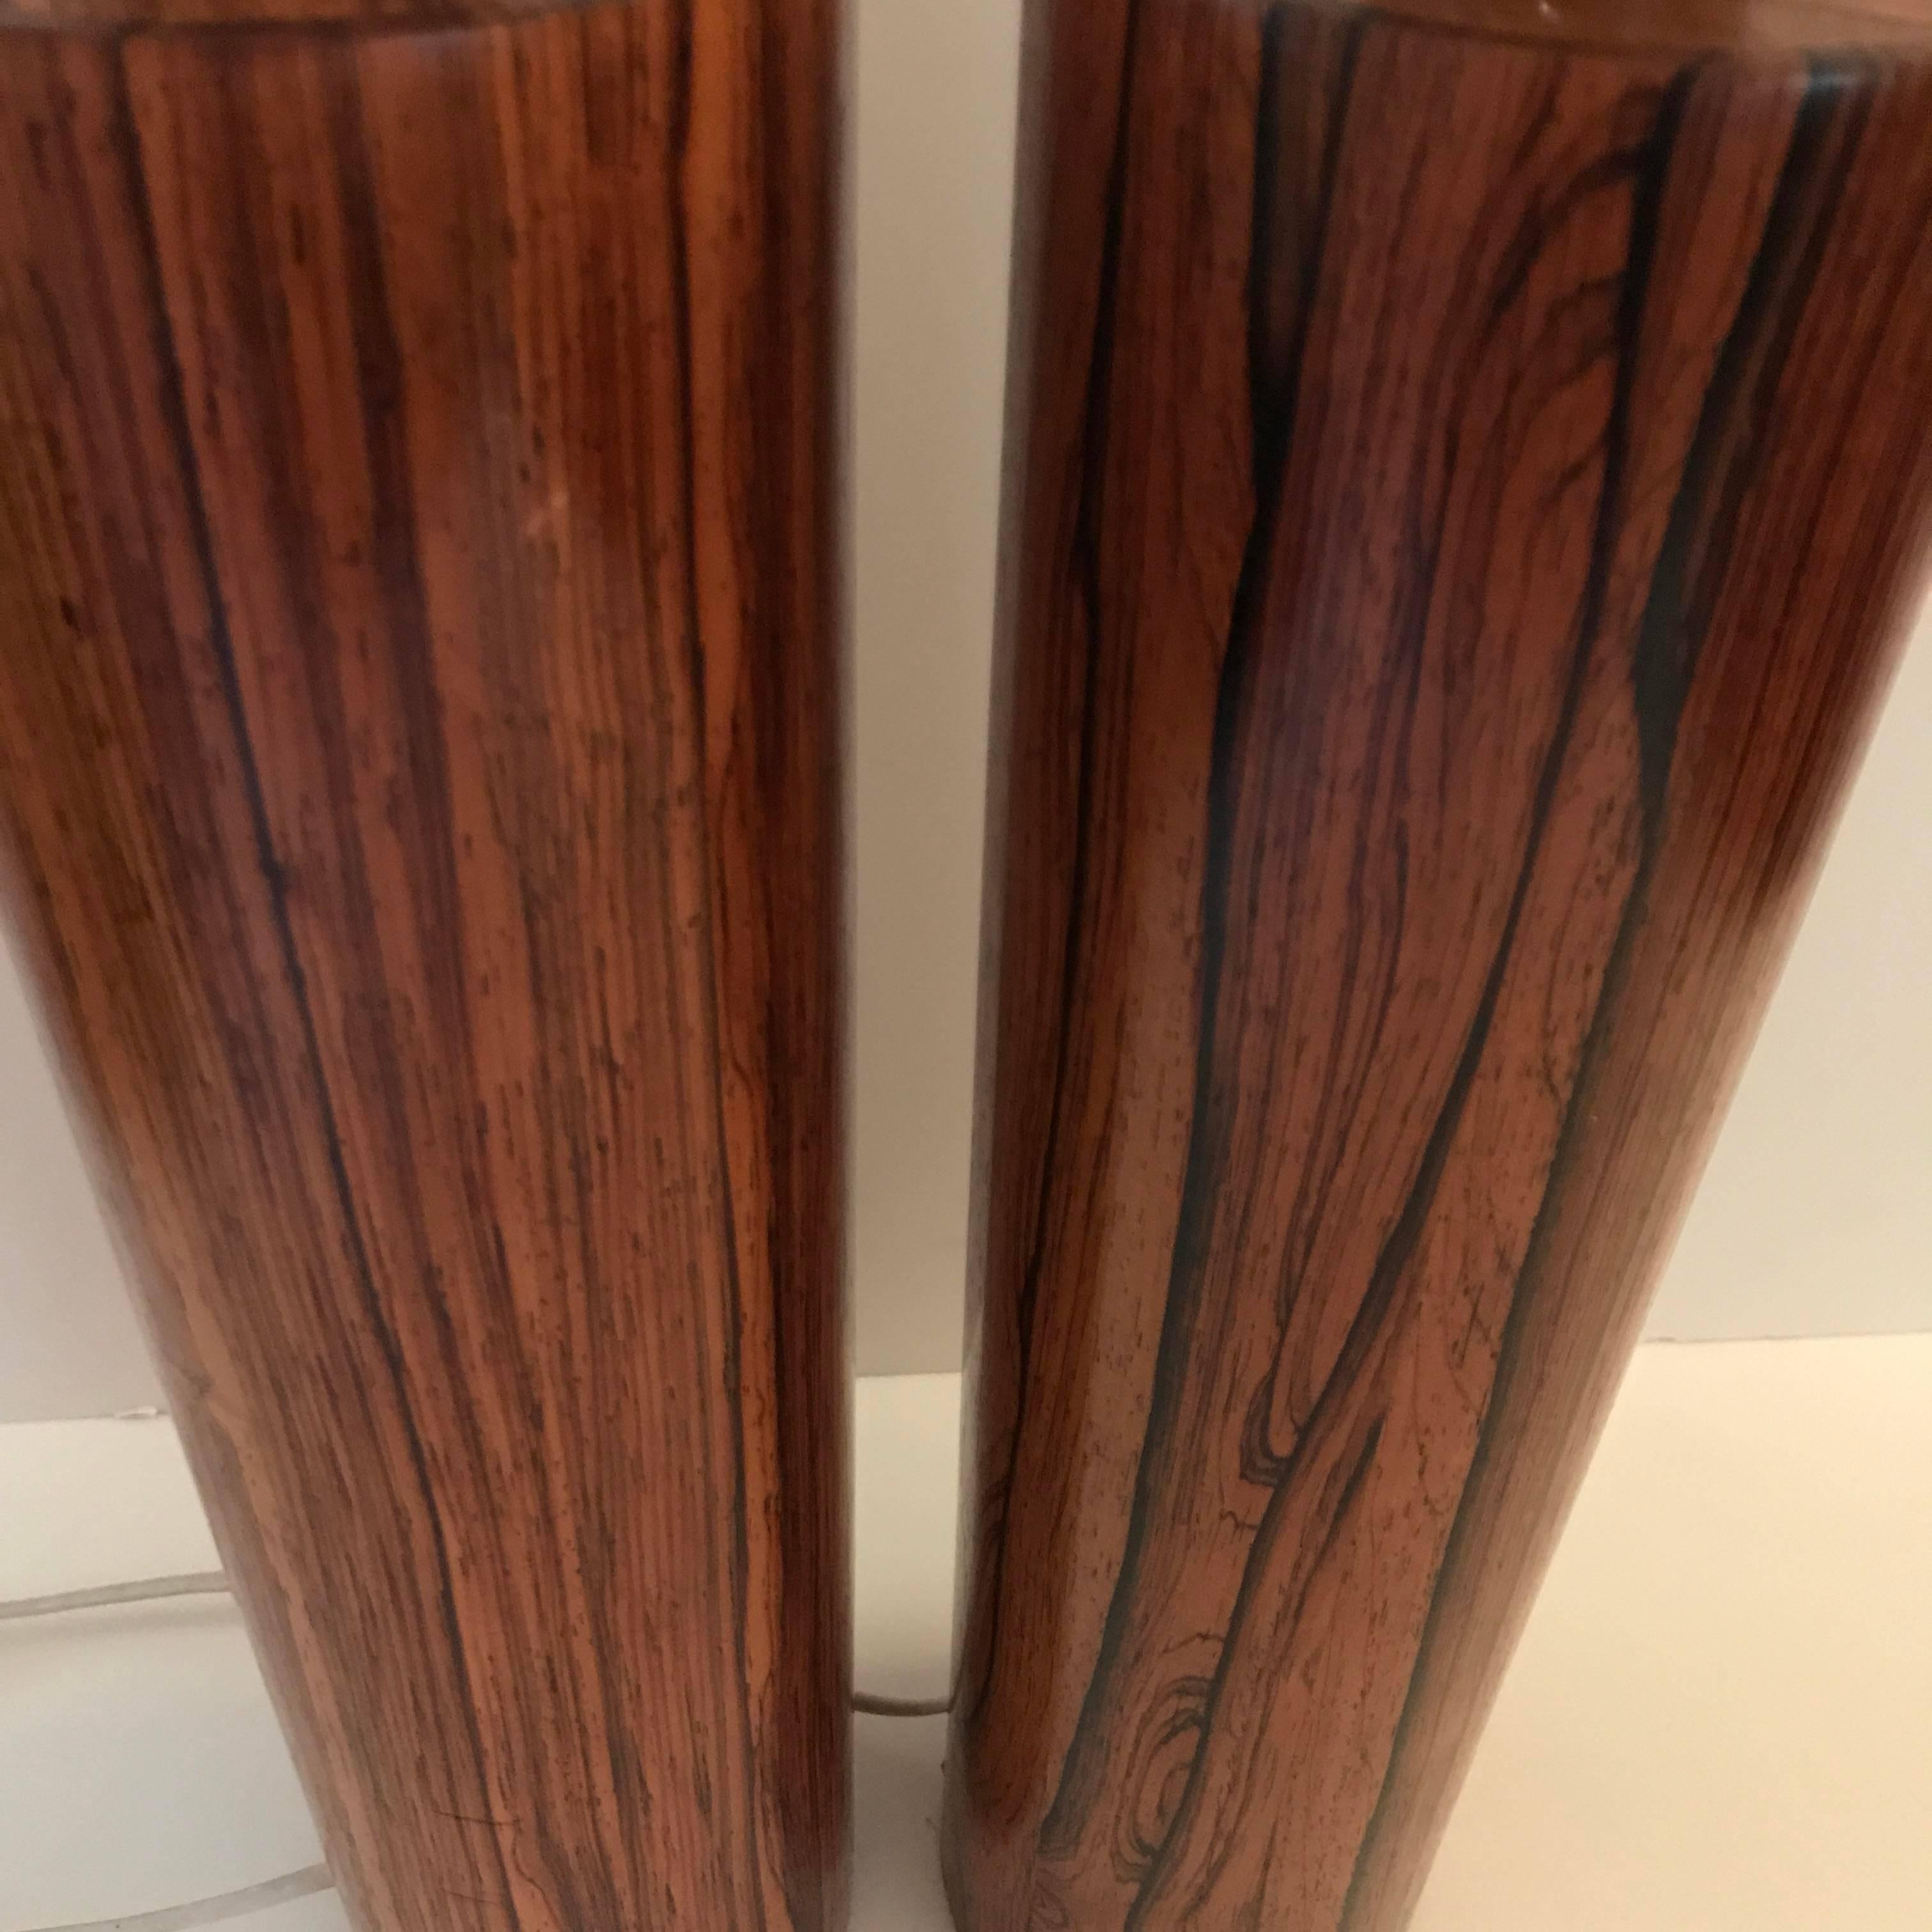 Large Pair of Swedish Luxus Rosewood Table Lamps by Uno & Östen Kristiansson For Sale 1